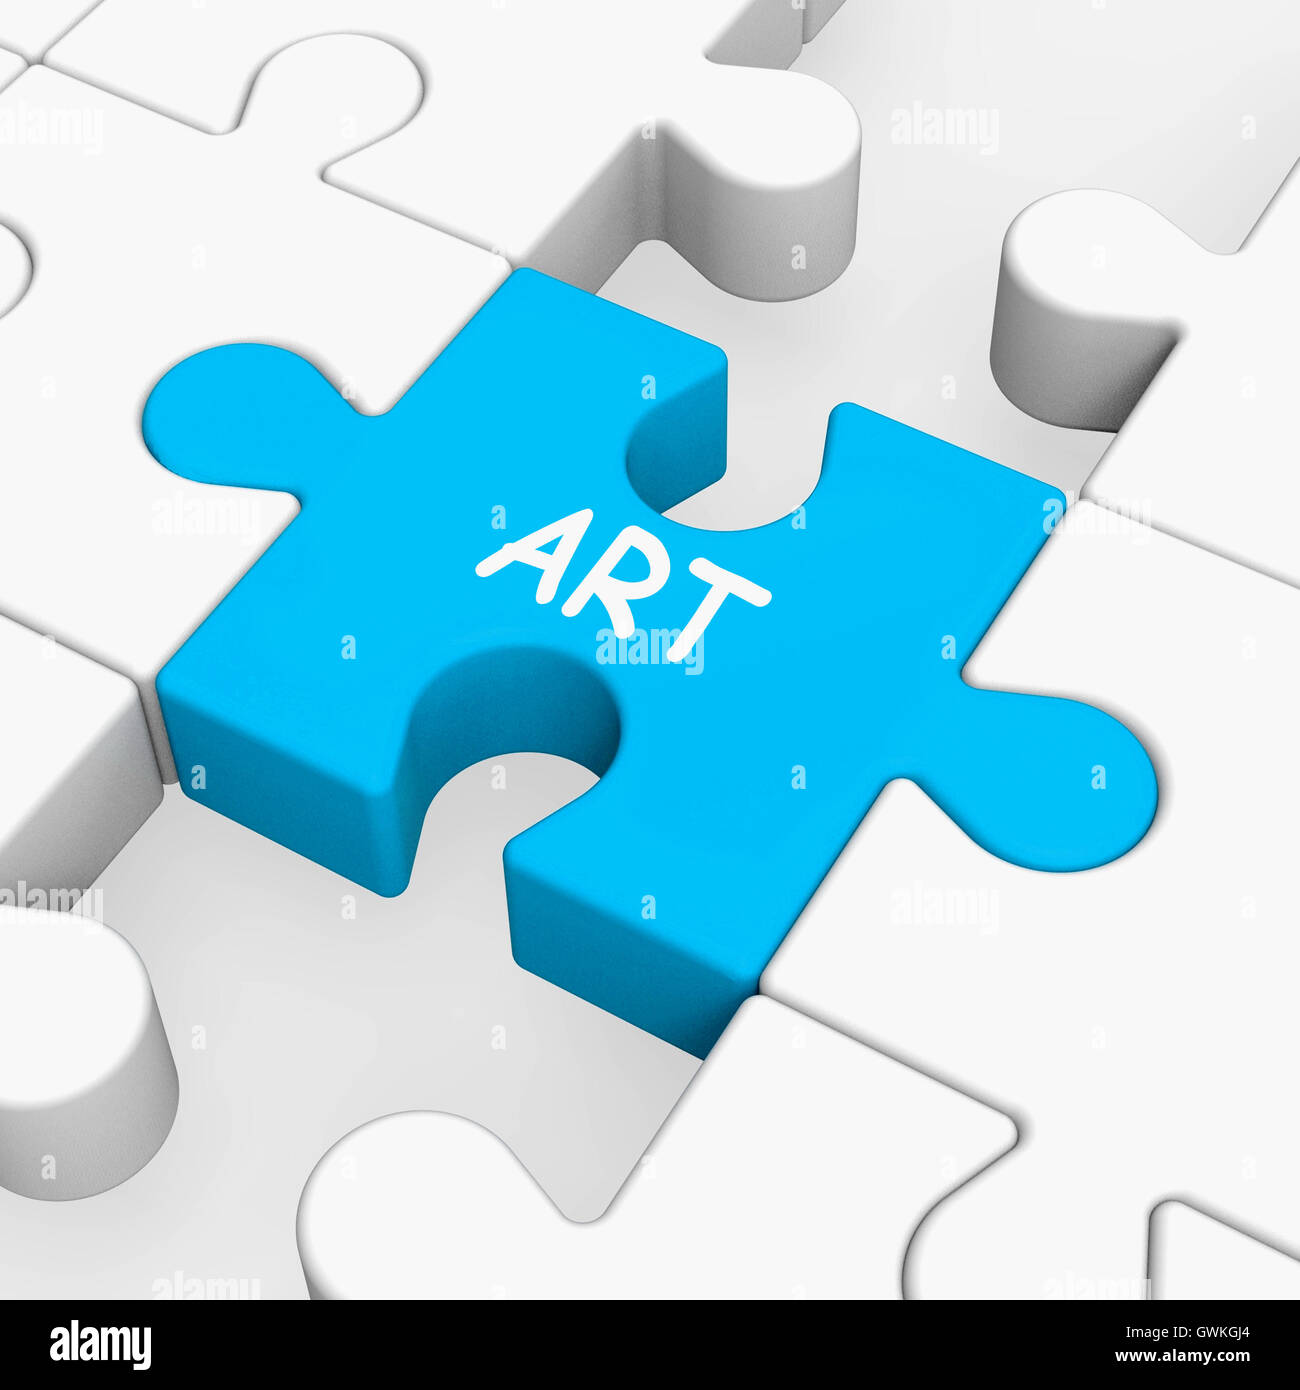 Art Puzzle Shows Arts Artistic Artist And Artwork Stock Photo